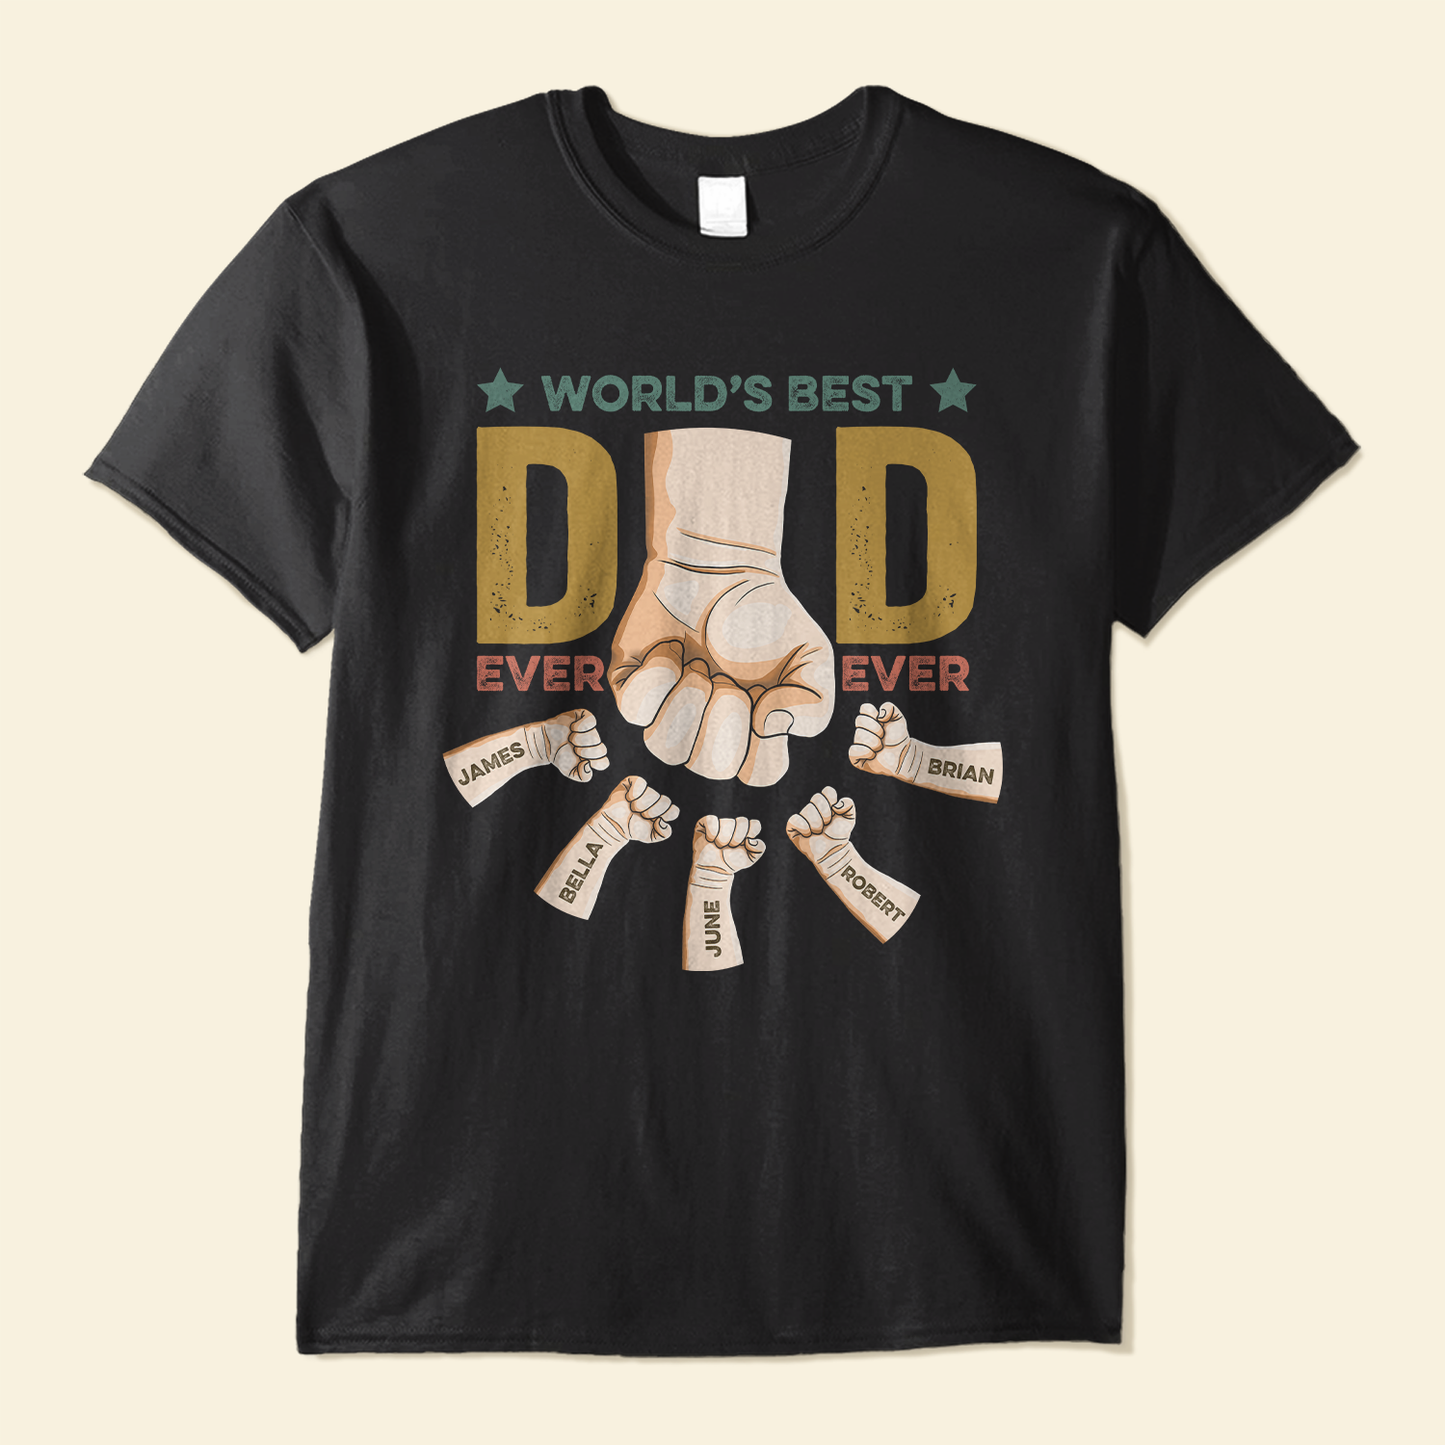 Best Dad Ever Ever - Personalized Shirt